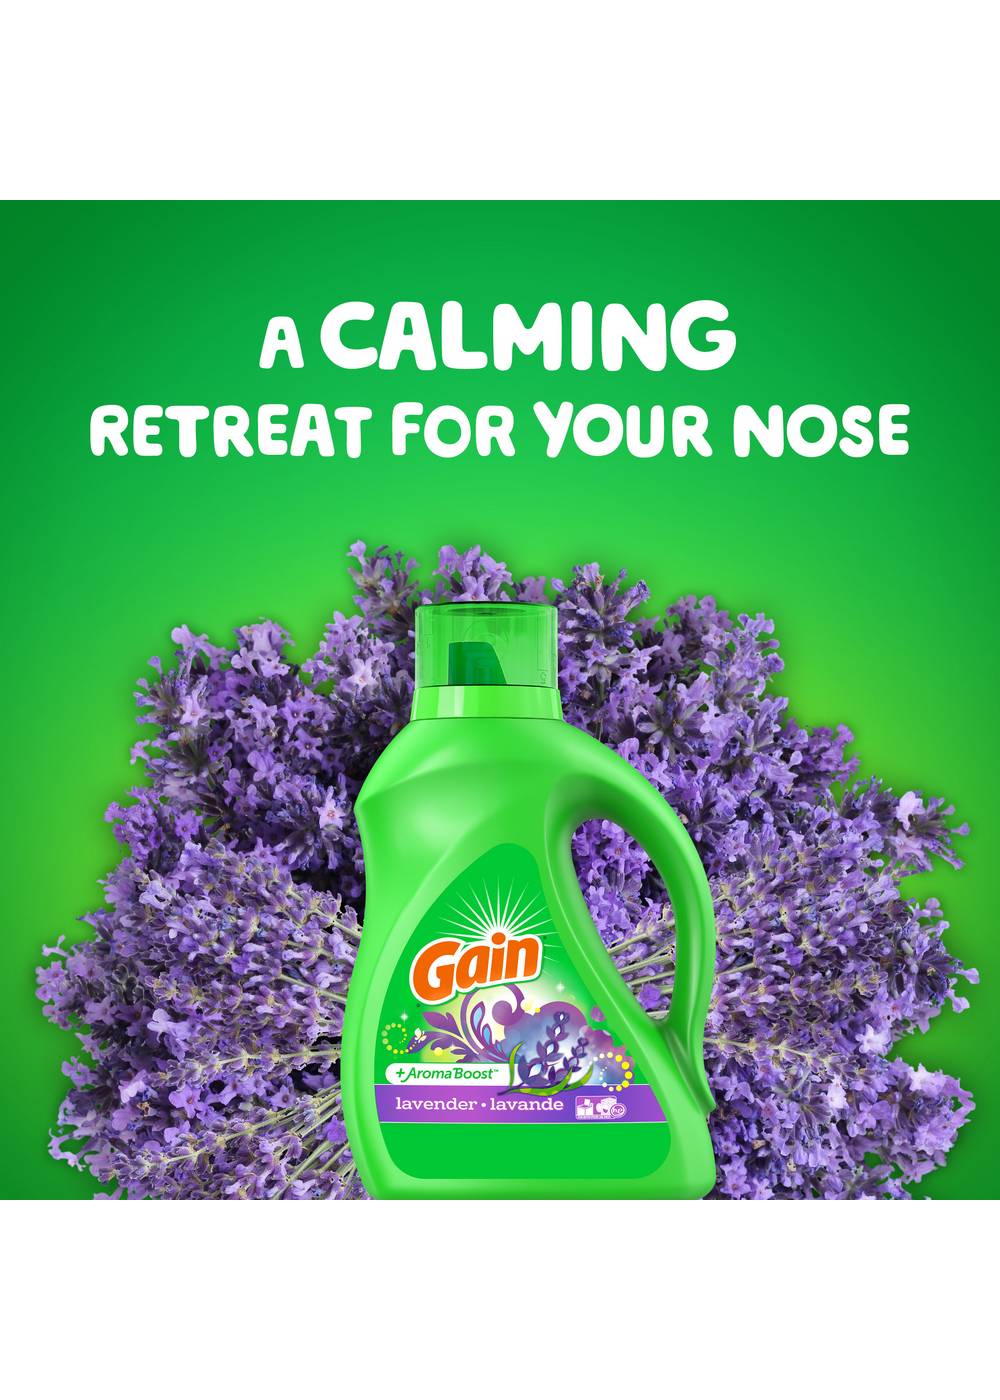 Gain + Aroma Boost HE Liquid Laundry Detergent, 107 Loads - Lavender; image 4 of 6